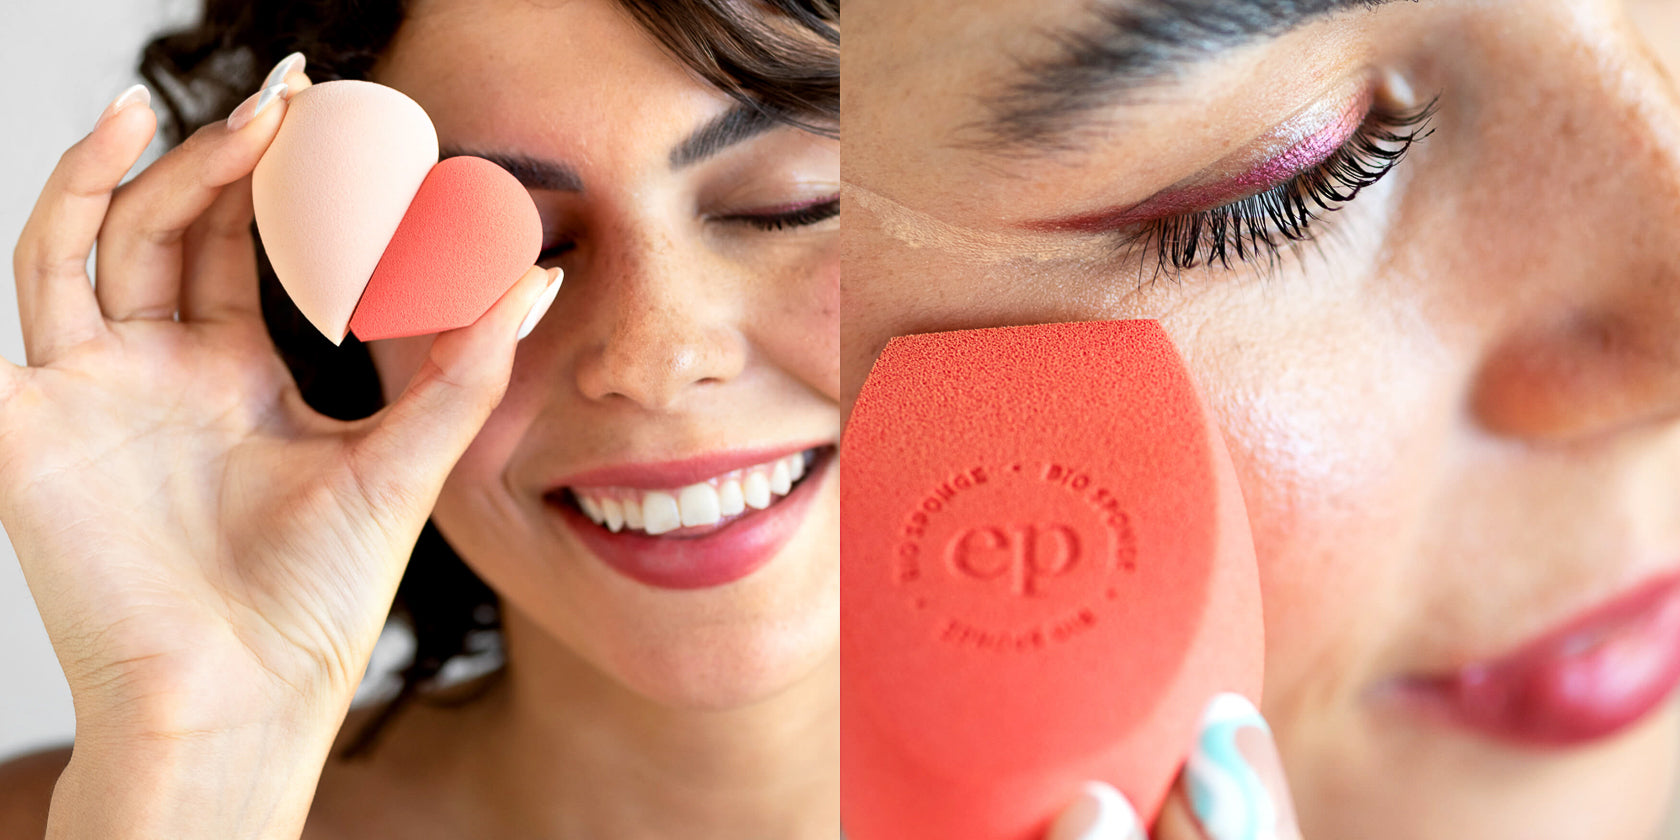 blend, bounce & blur with bio all-beauty sponges